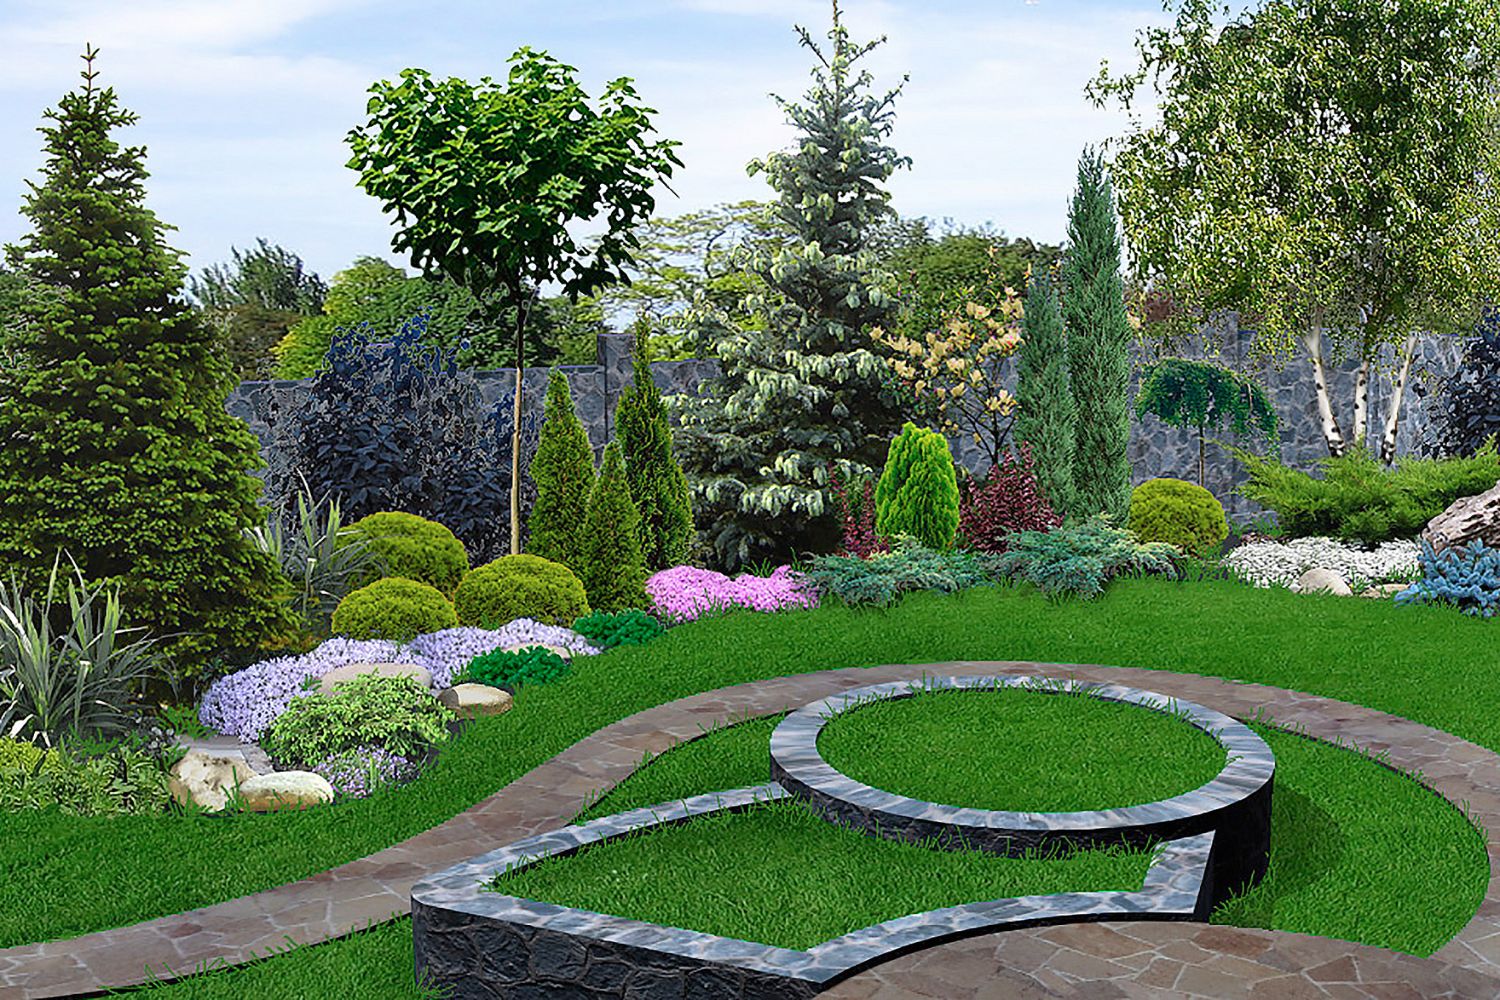 A beautiful landscaped lawn with tree and flowers. 